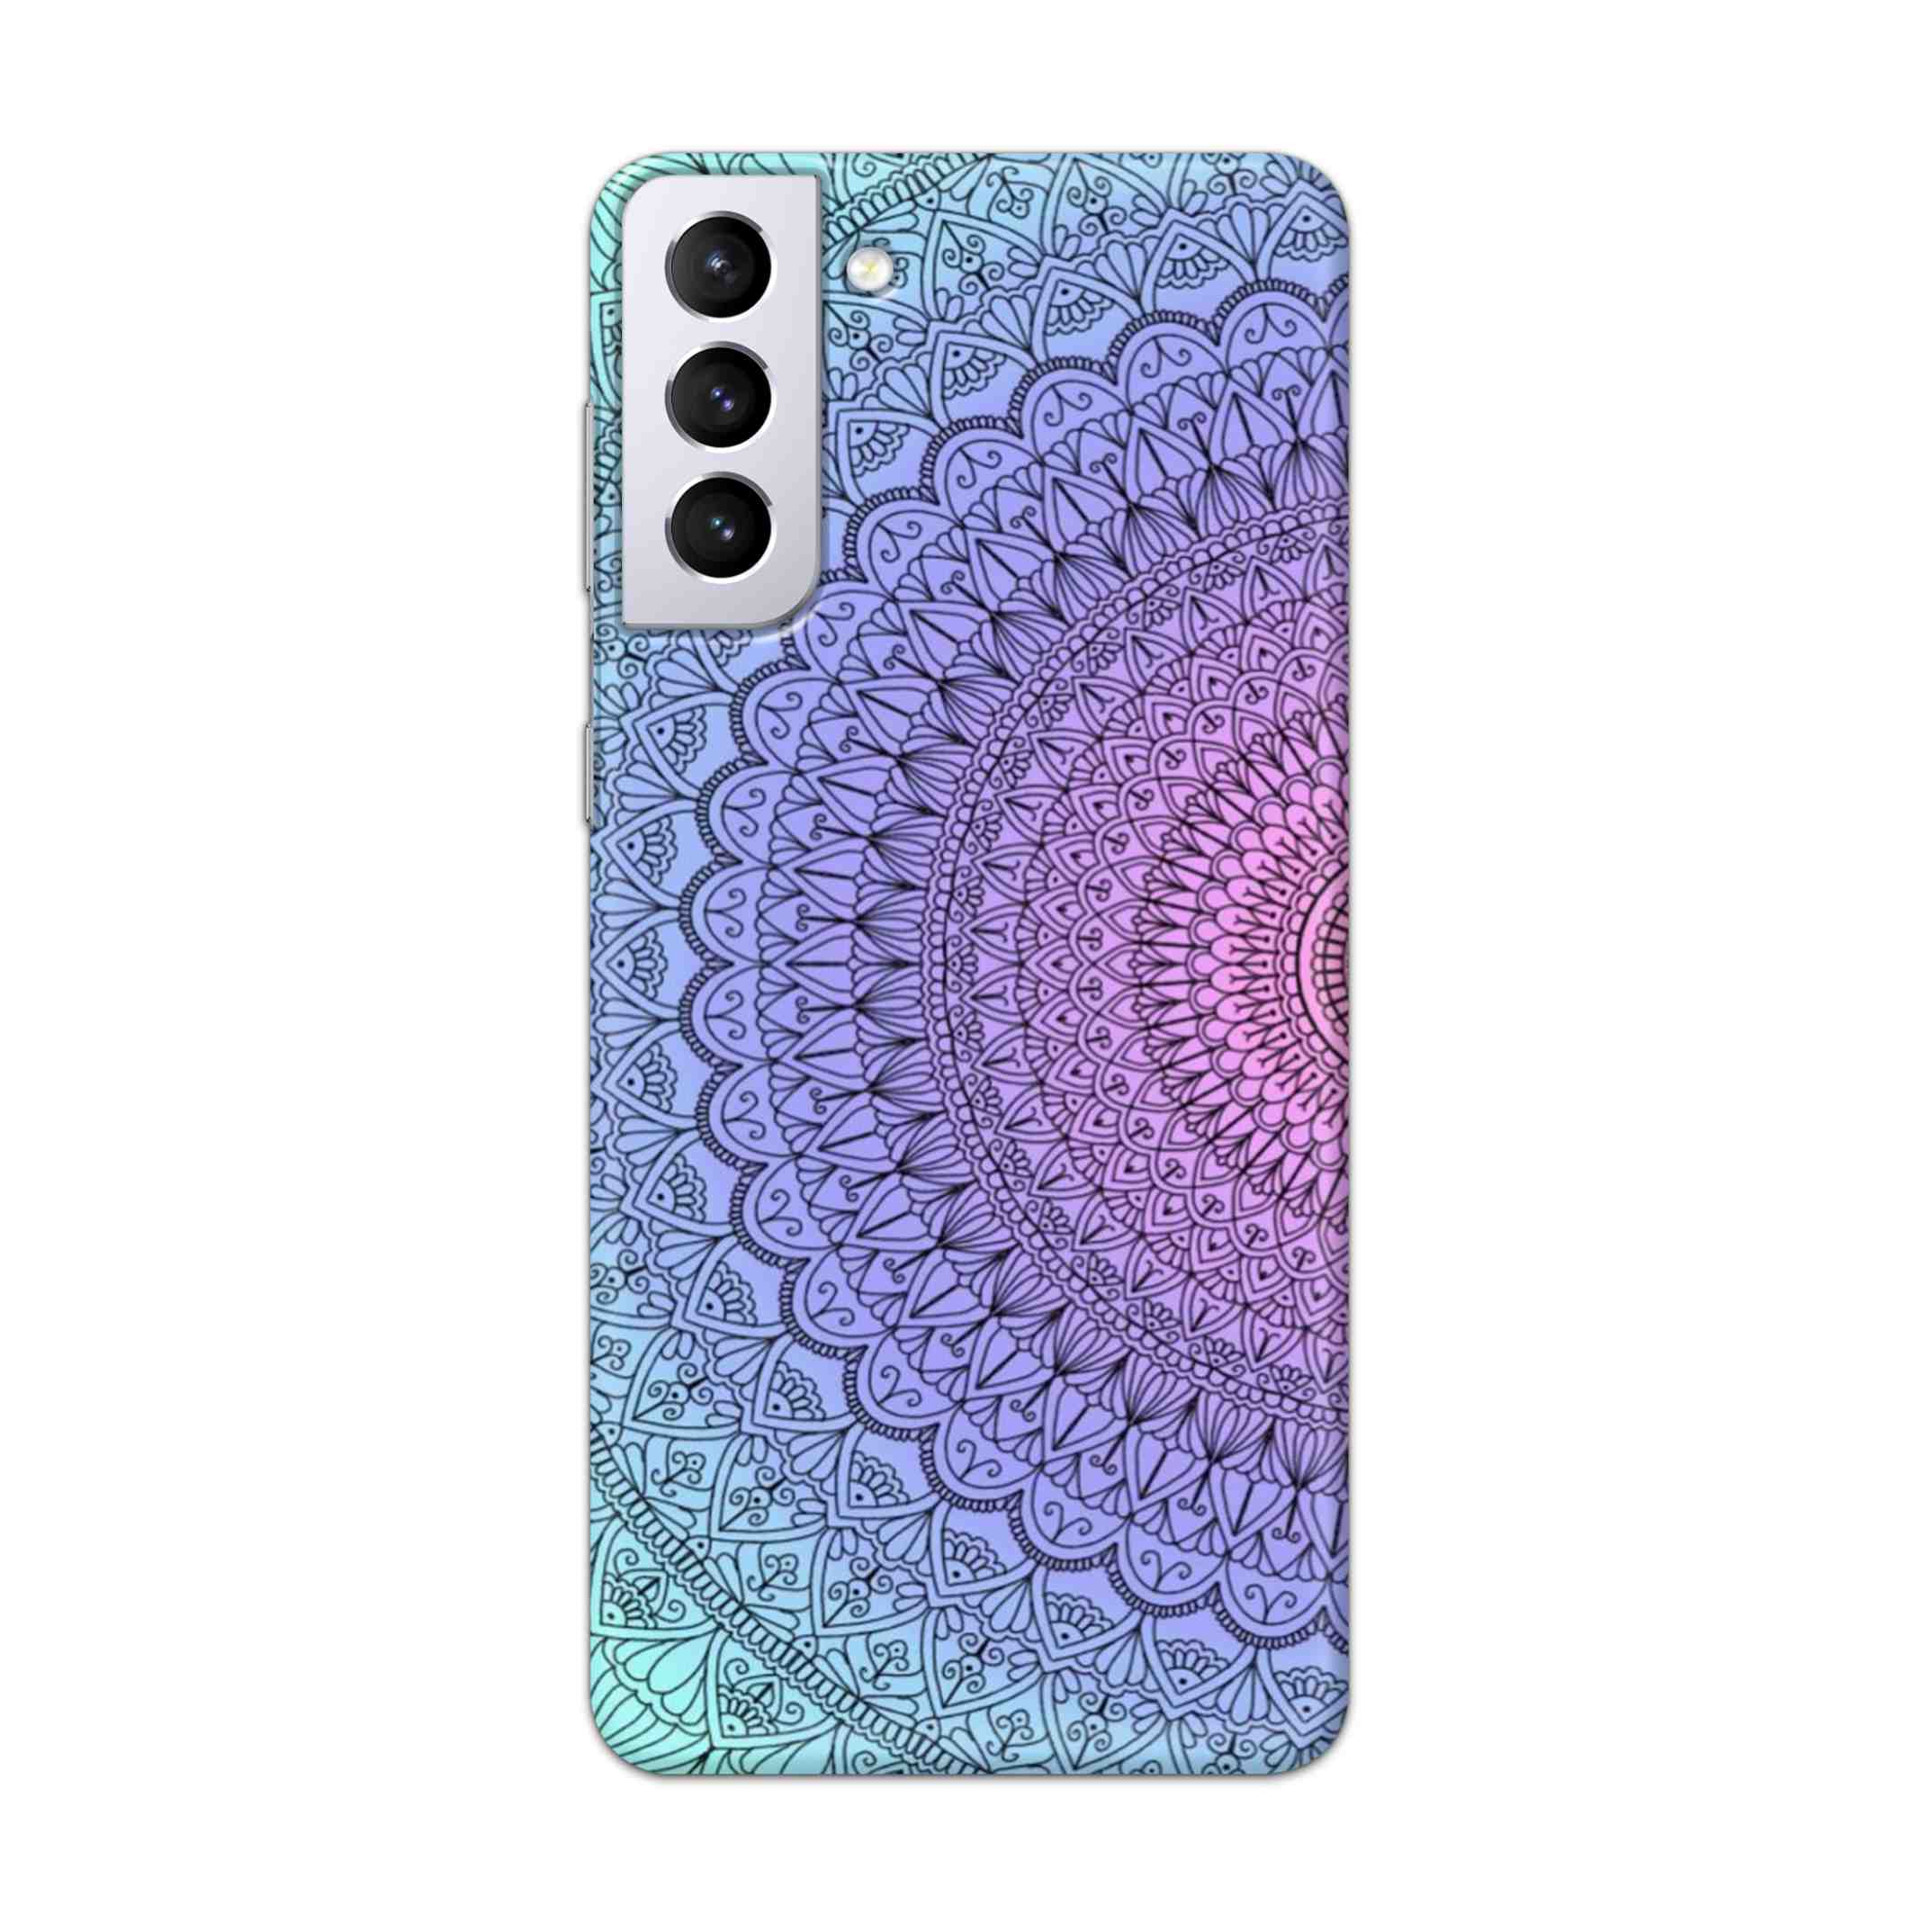 Buy Colourful Mandala Hard Back Mobile Phone Case Cover For Samsung Galaxy S21 Plus Online